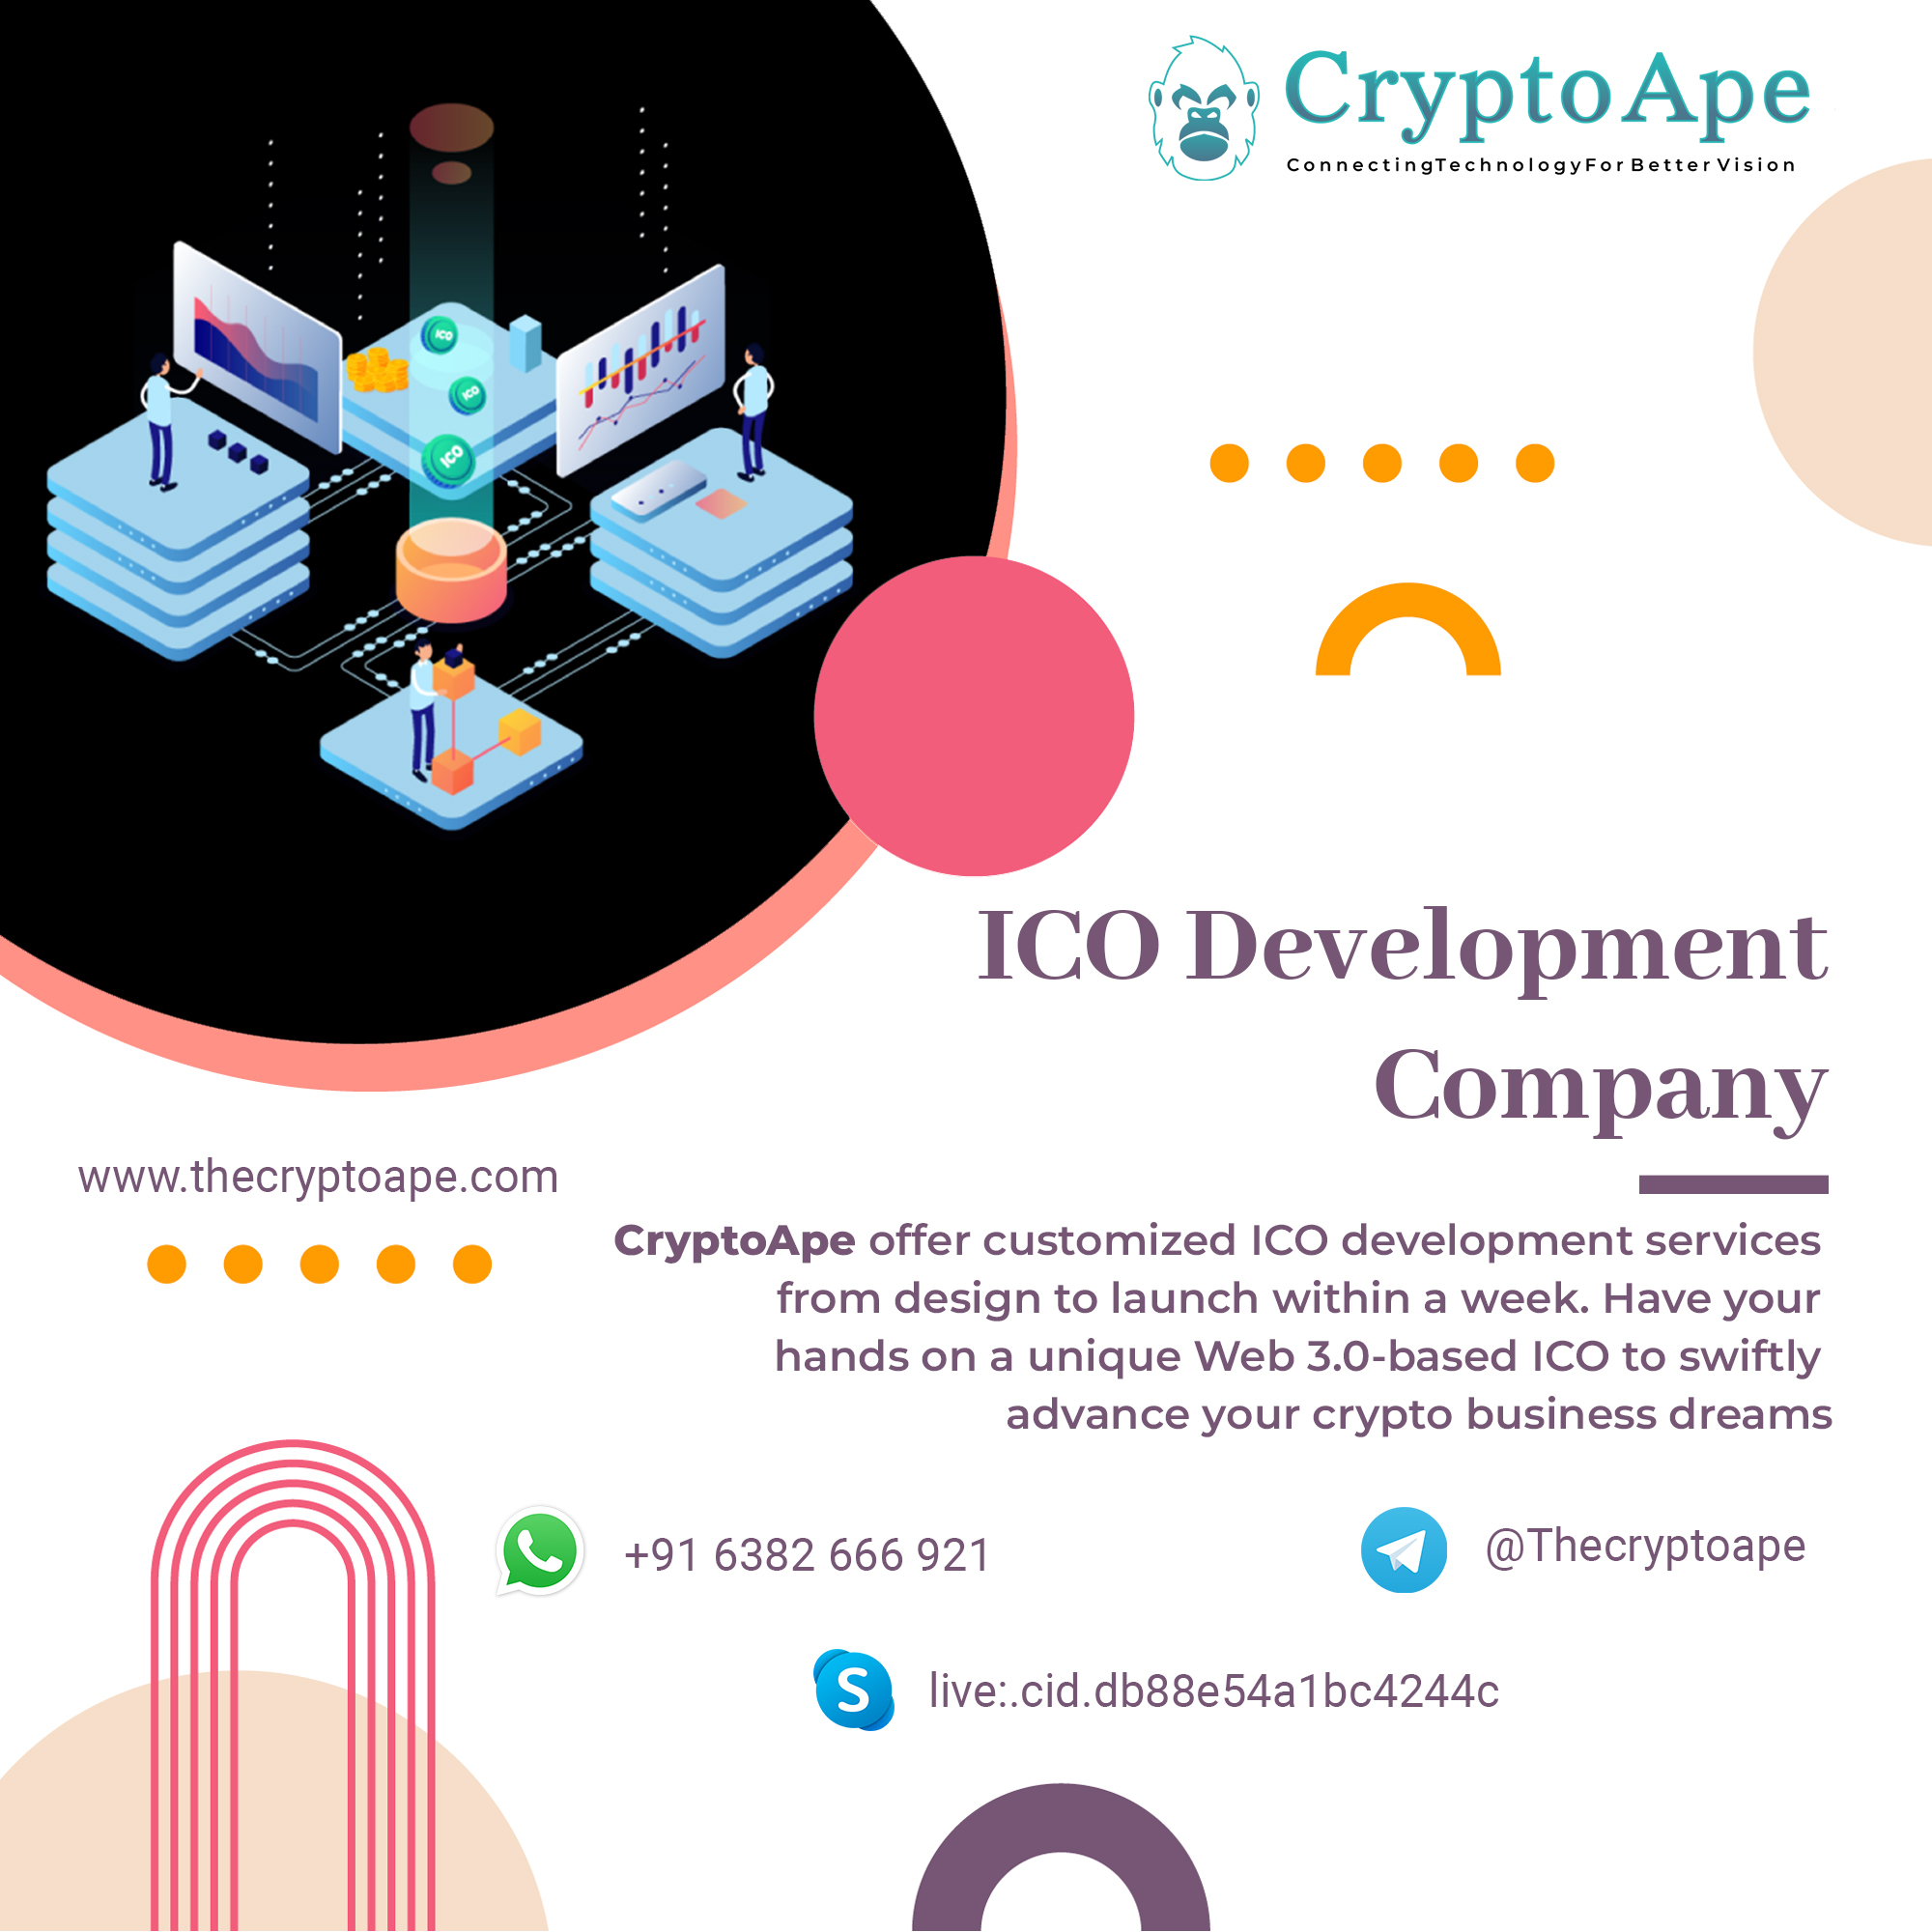 *

CryptoApe

ctingTechnologyFor Better Vi

   

ICO Development
Company

CryptoApe offer customized ICO development services
from design to launch within a week. Have your
hands on a unique Web 3.0-based ICO to swiftly

advance your crypto business dreams

www.thecryptoape.com

8 +916382 666 921 @Thecryptoape

9 live:.cid.db88e54a1bc4244c

~\